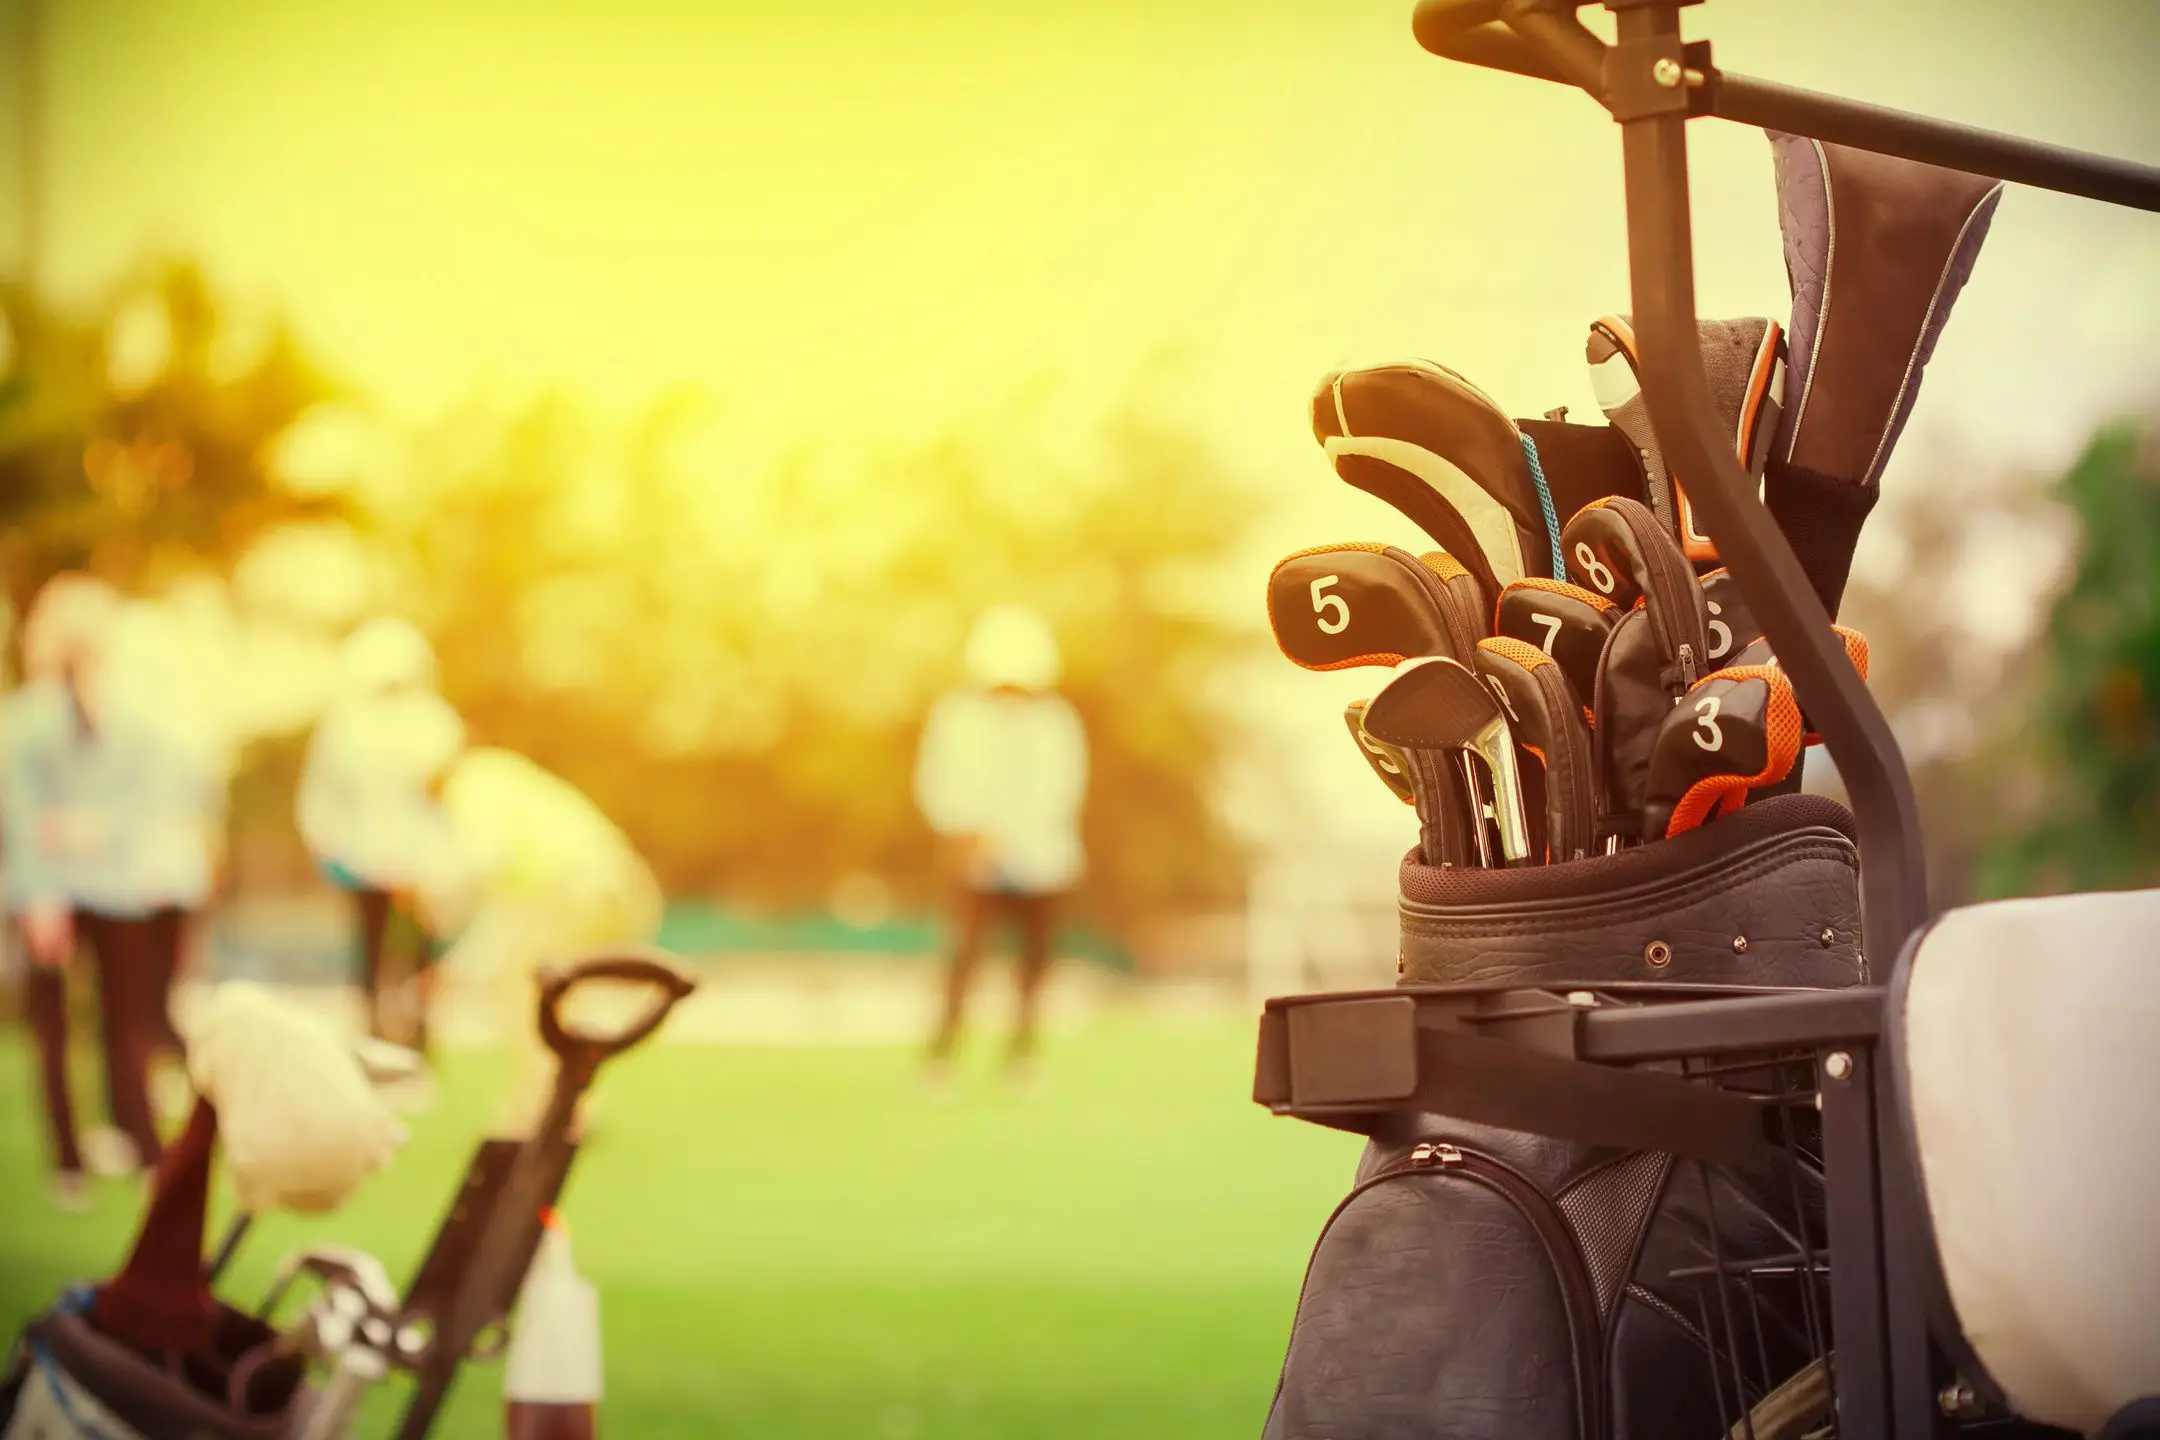 Do you use a power cart or push cart when playing a round of golf?